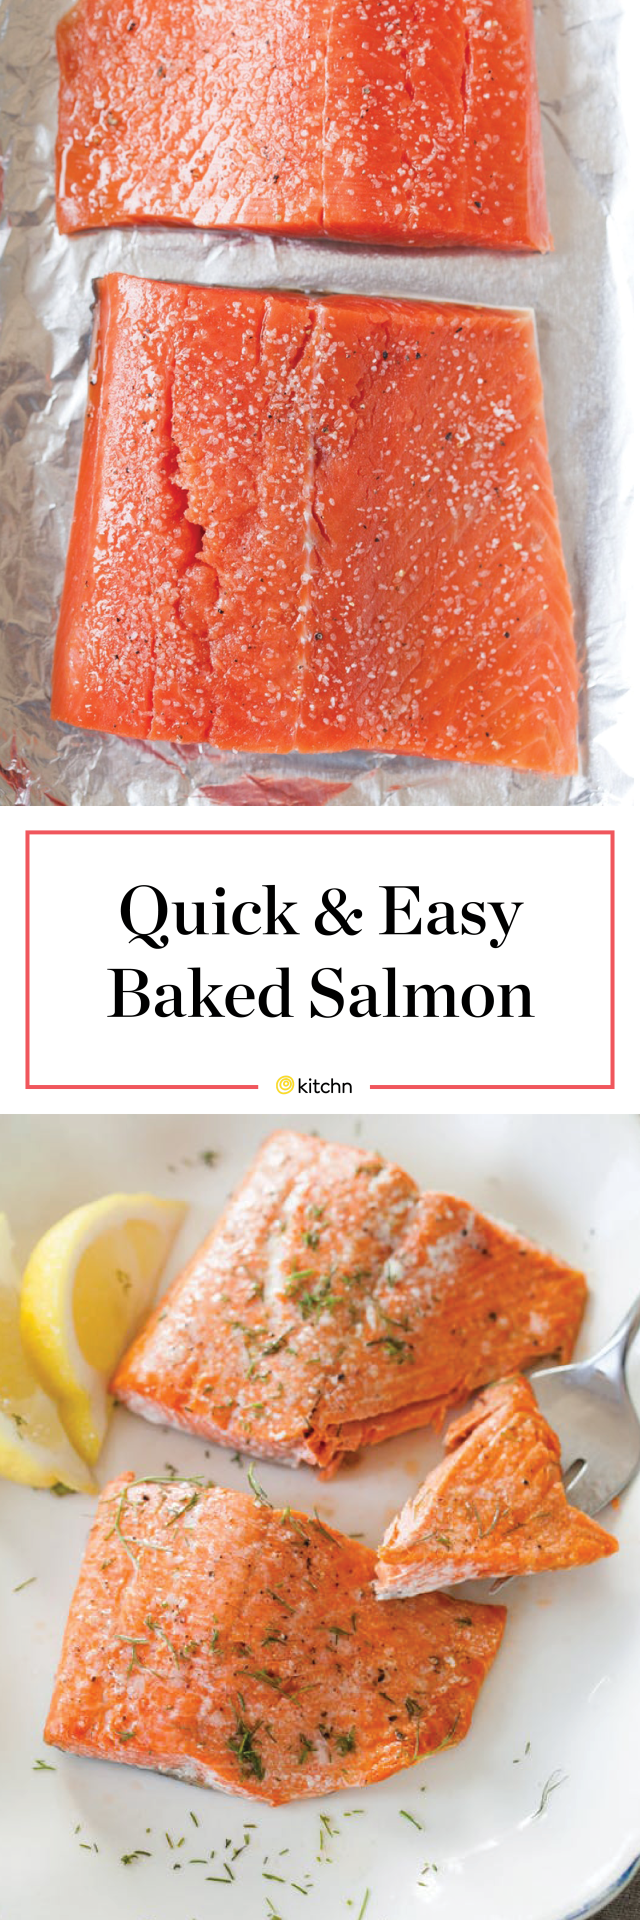 The Best Way to Cook Salmon in the Oven